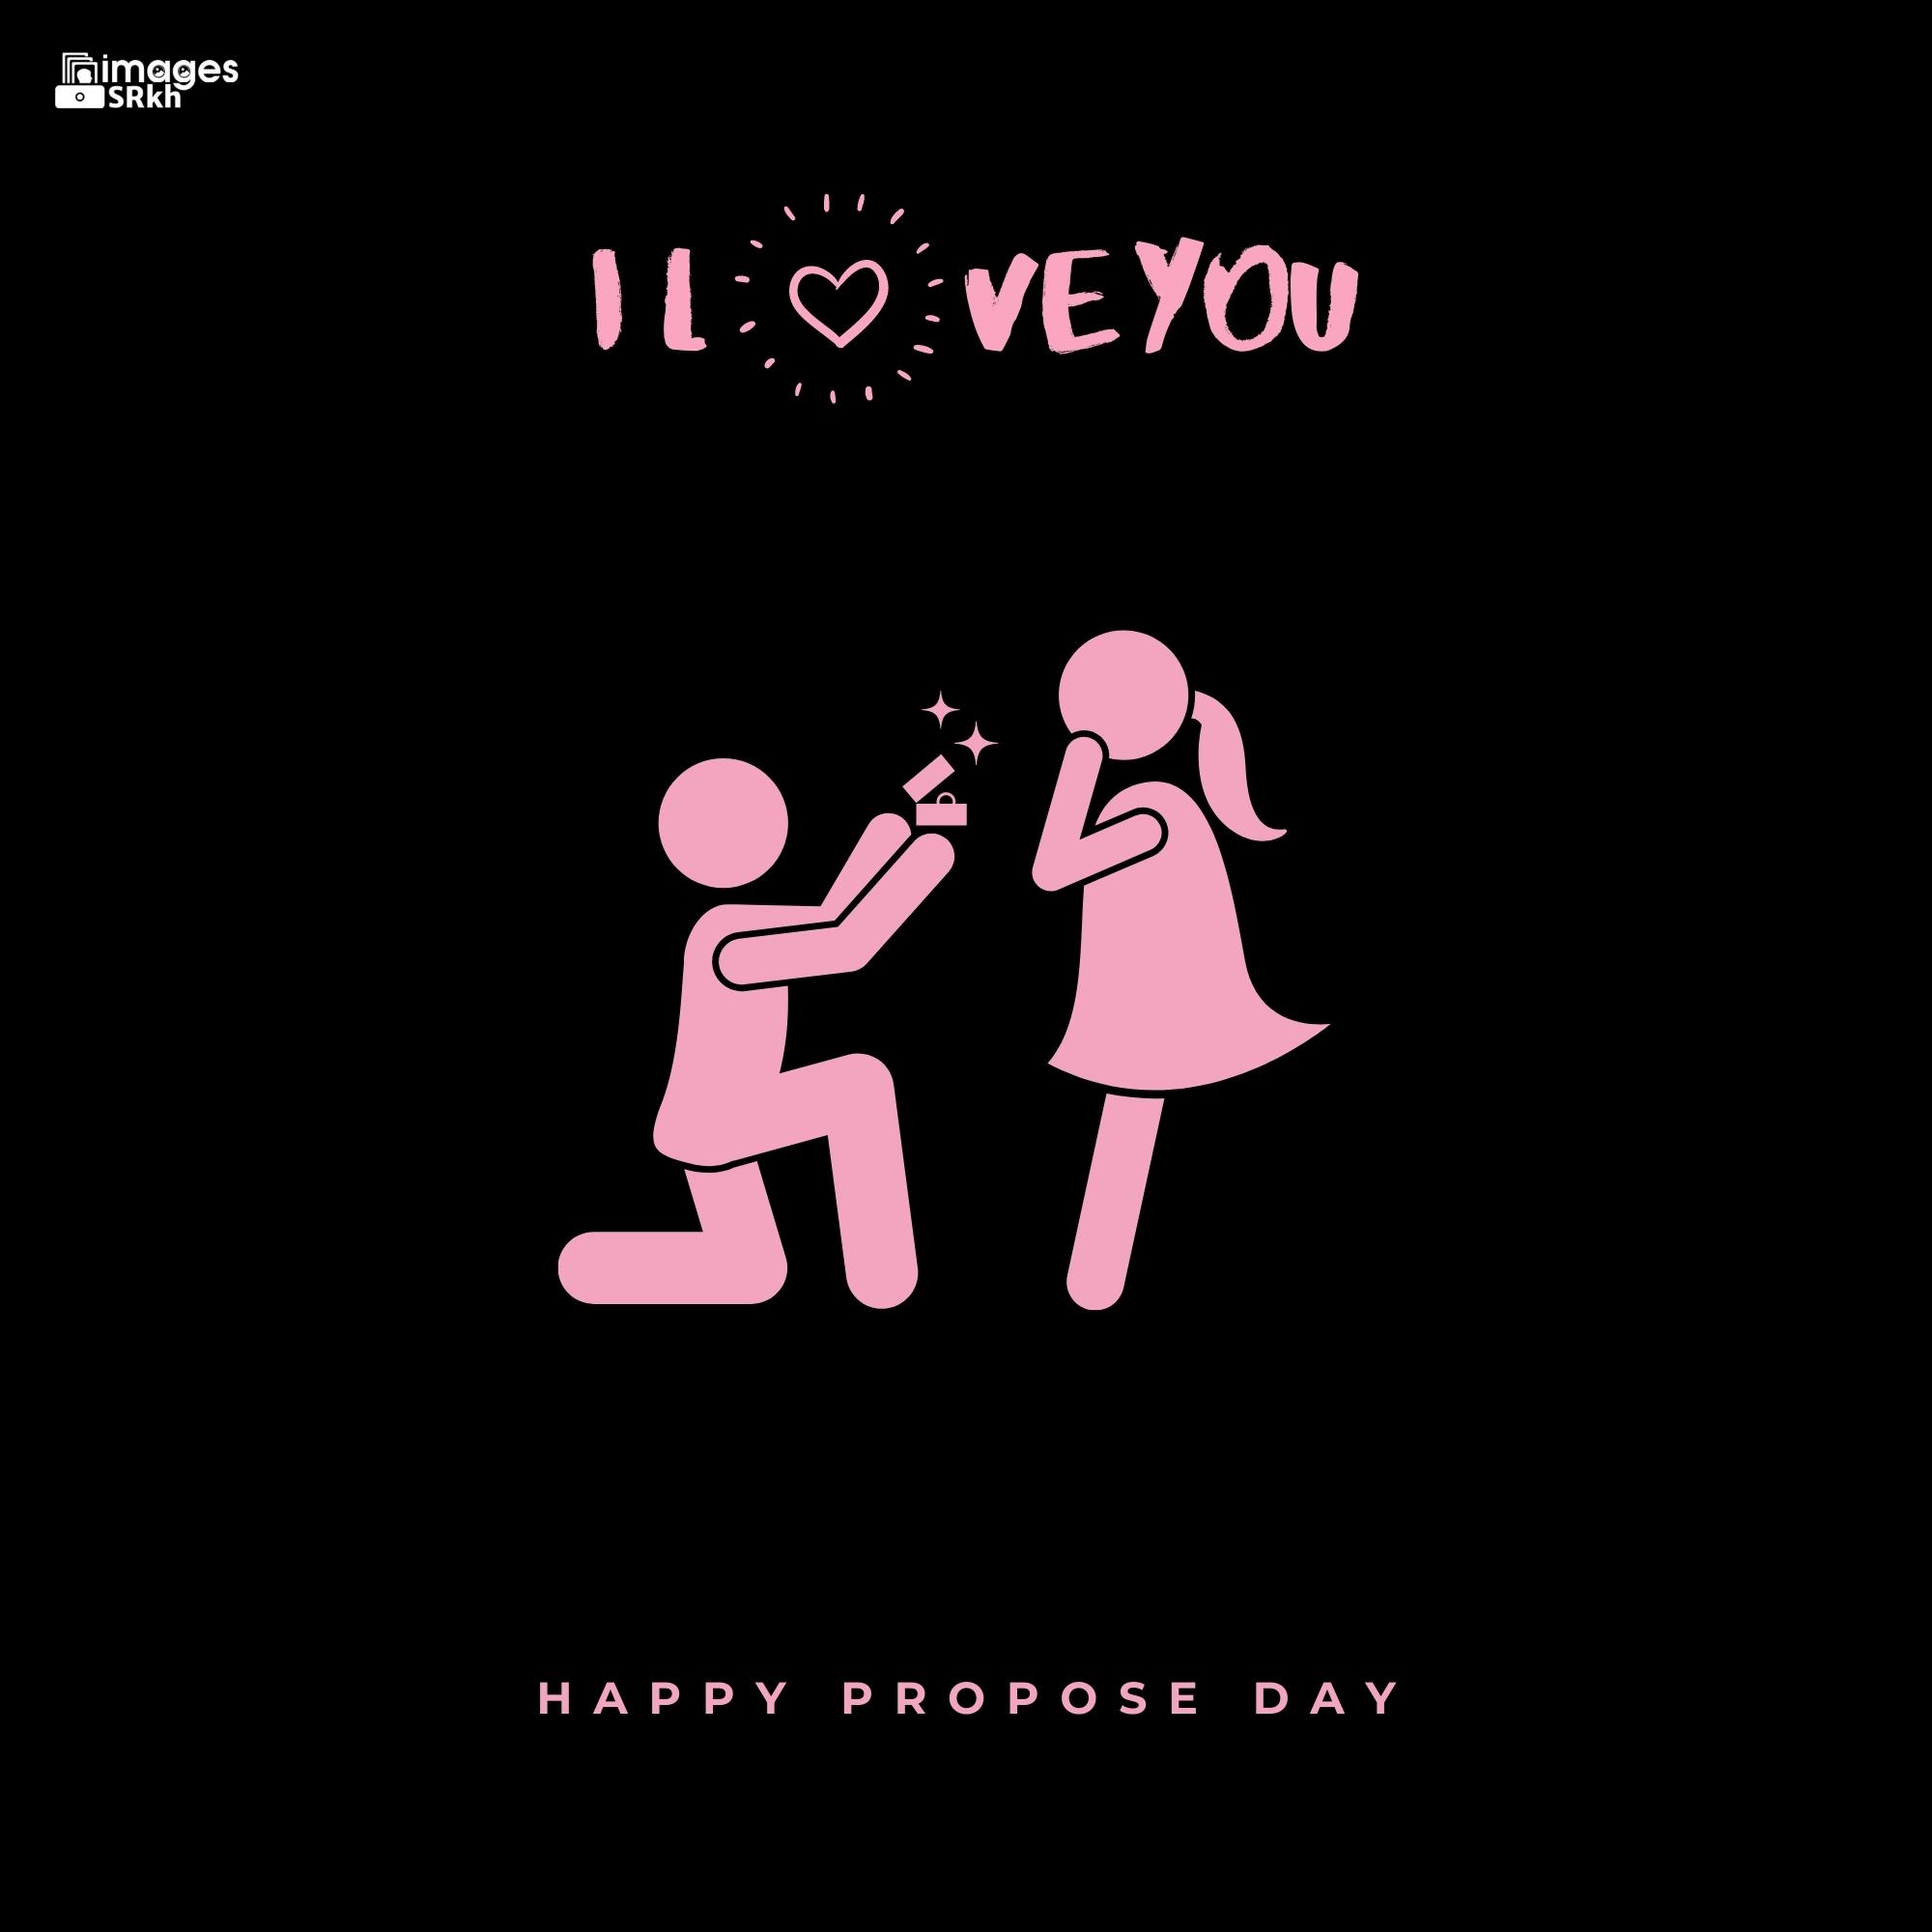 Happy Propose Day Images | 372 | I LOVE YOU